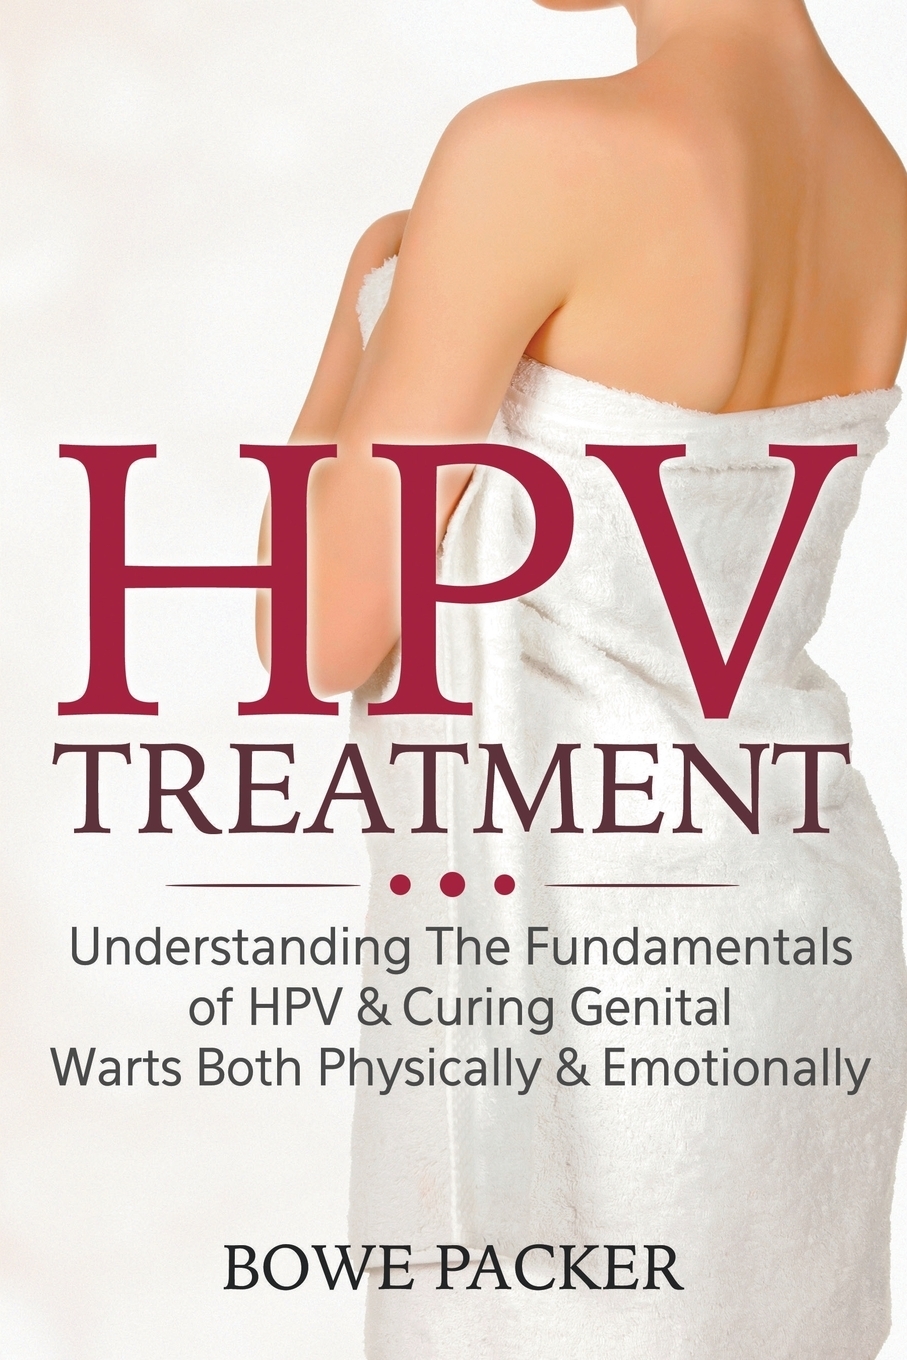 hpv in treatment